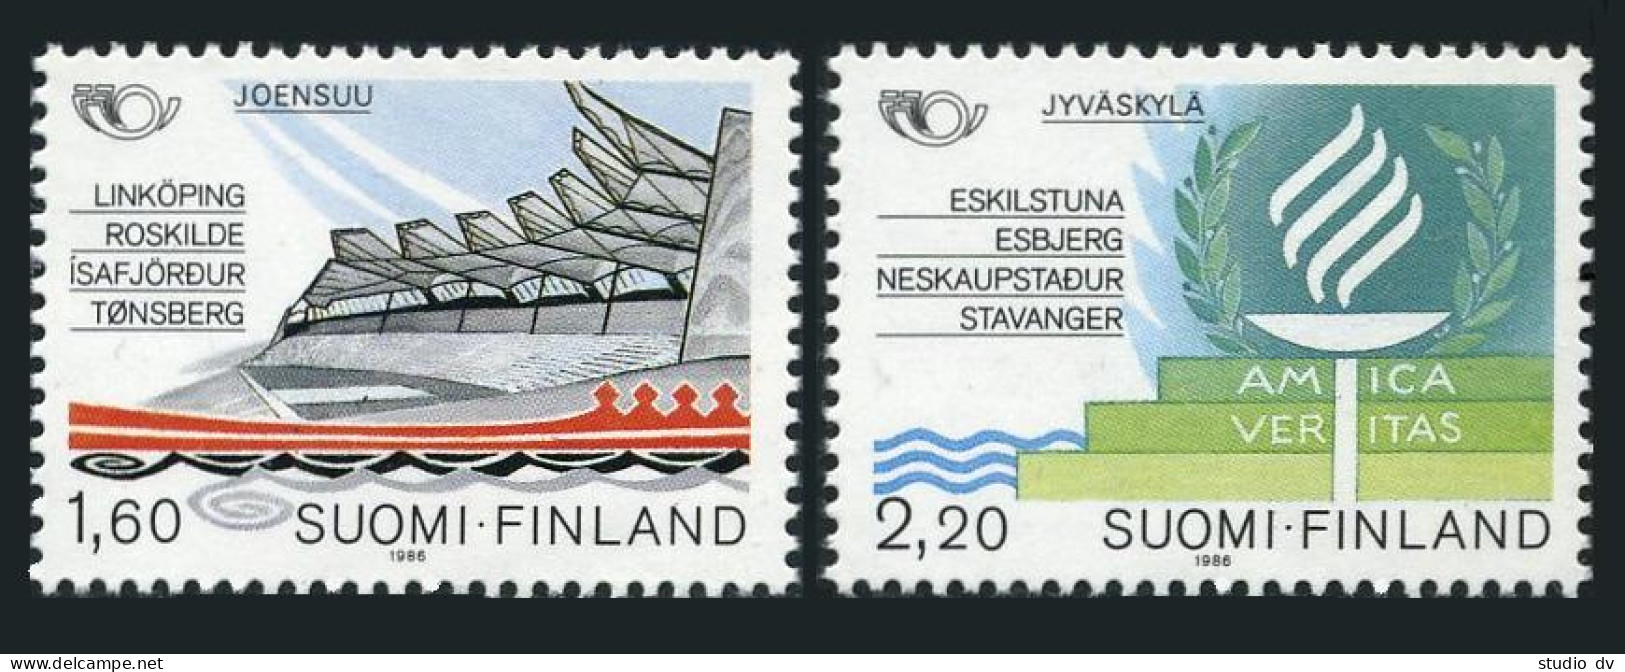 Finland 738-739, MNH. Michel 996-997. Nordic Cooperation 1986. Sister Towns. - Neufs